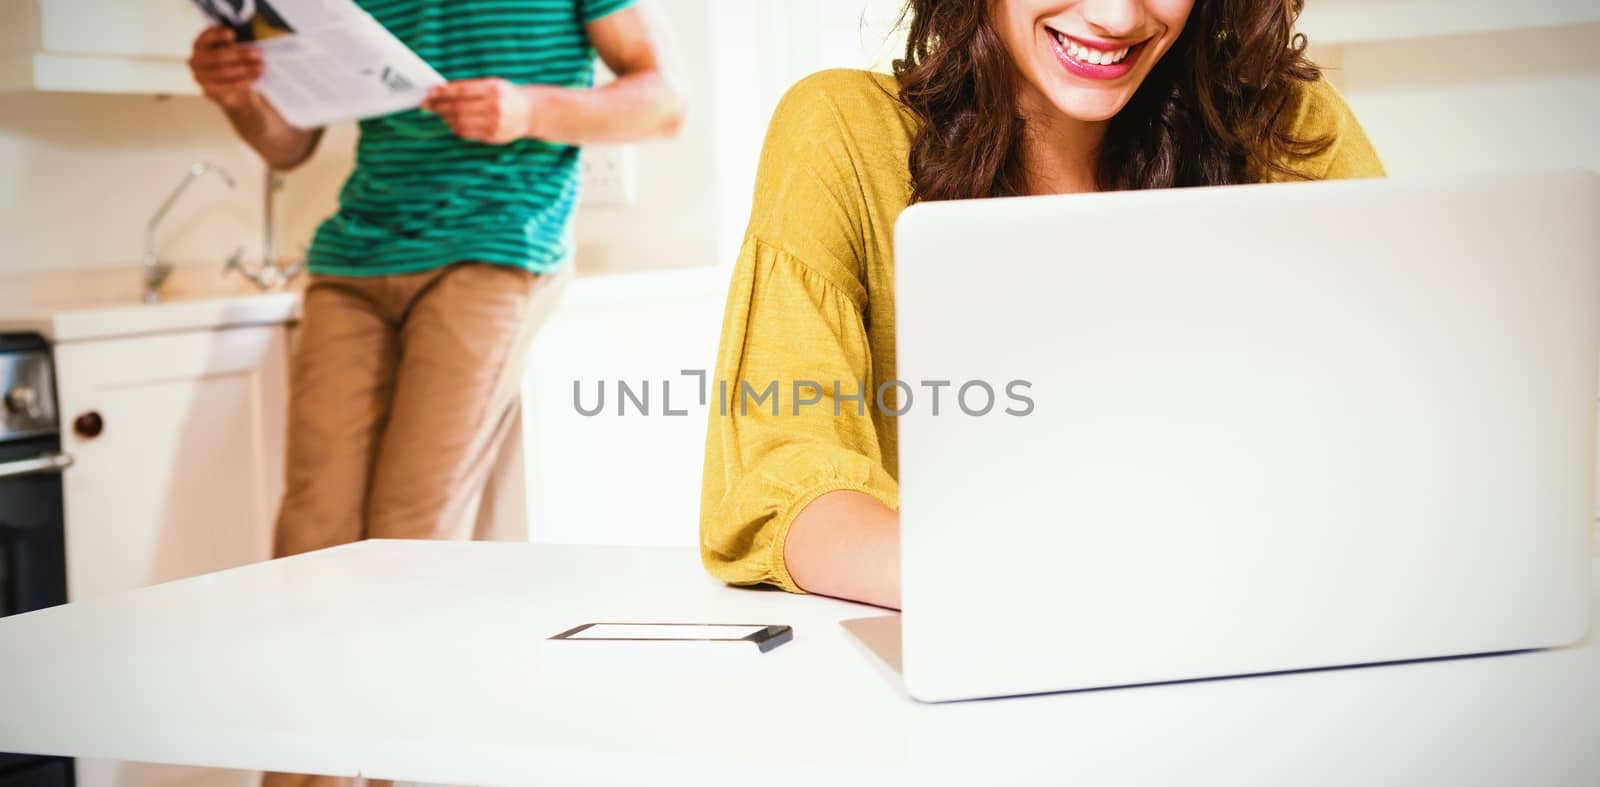 Woman using laptop while man reading newspaper in background at kitchen